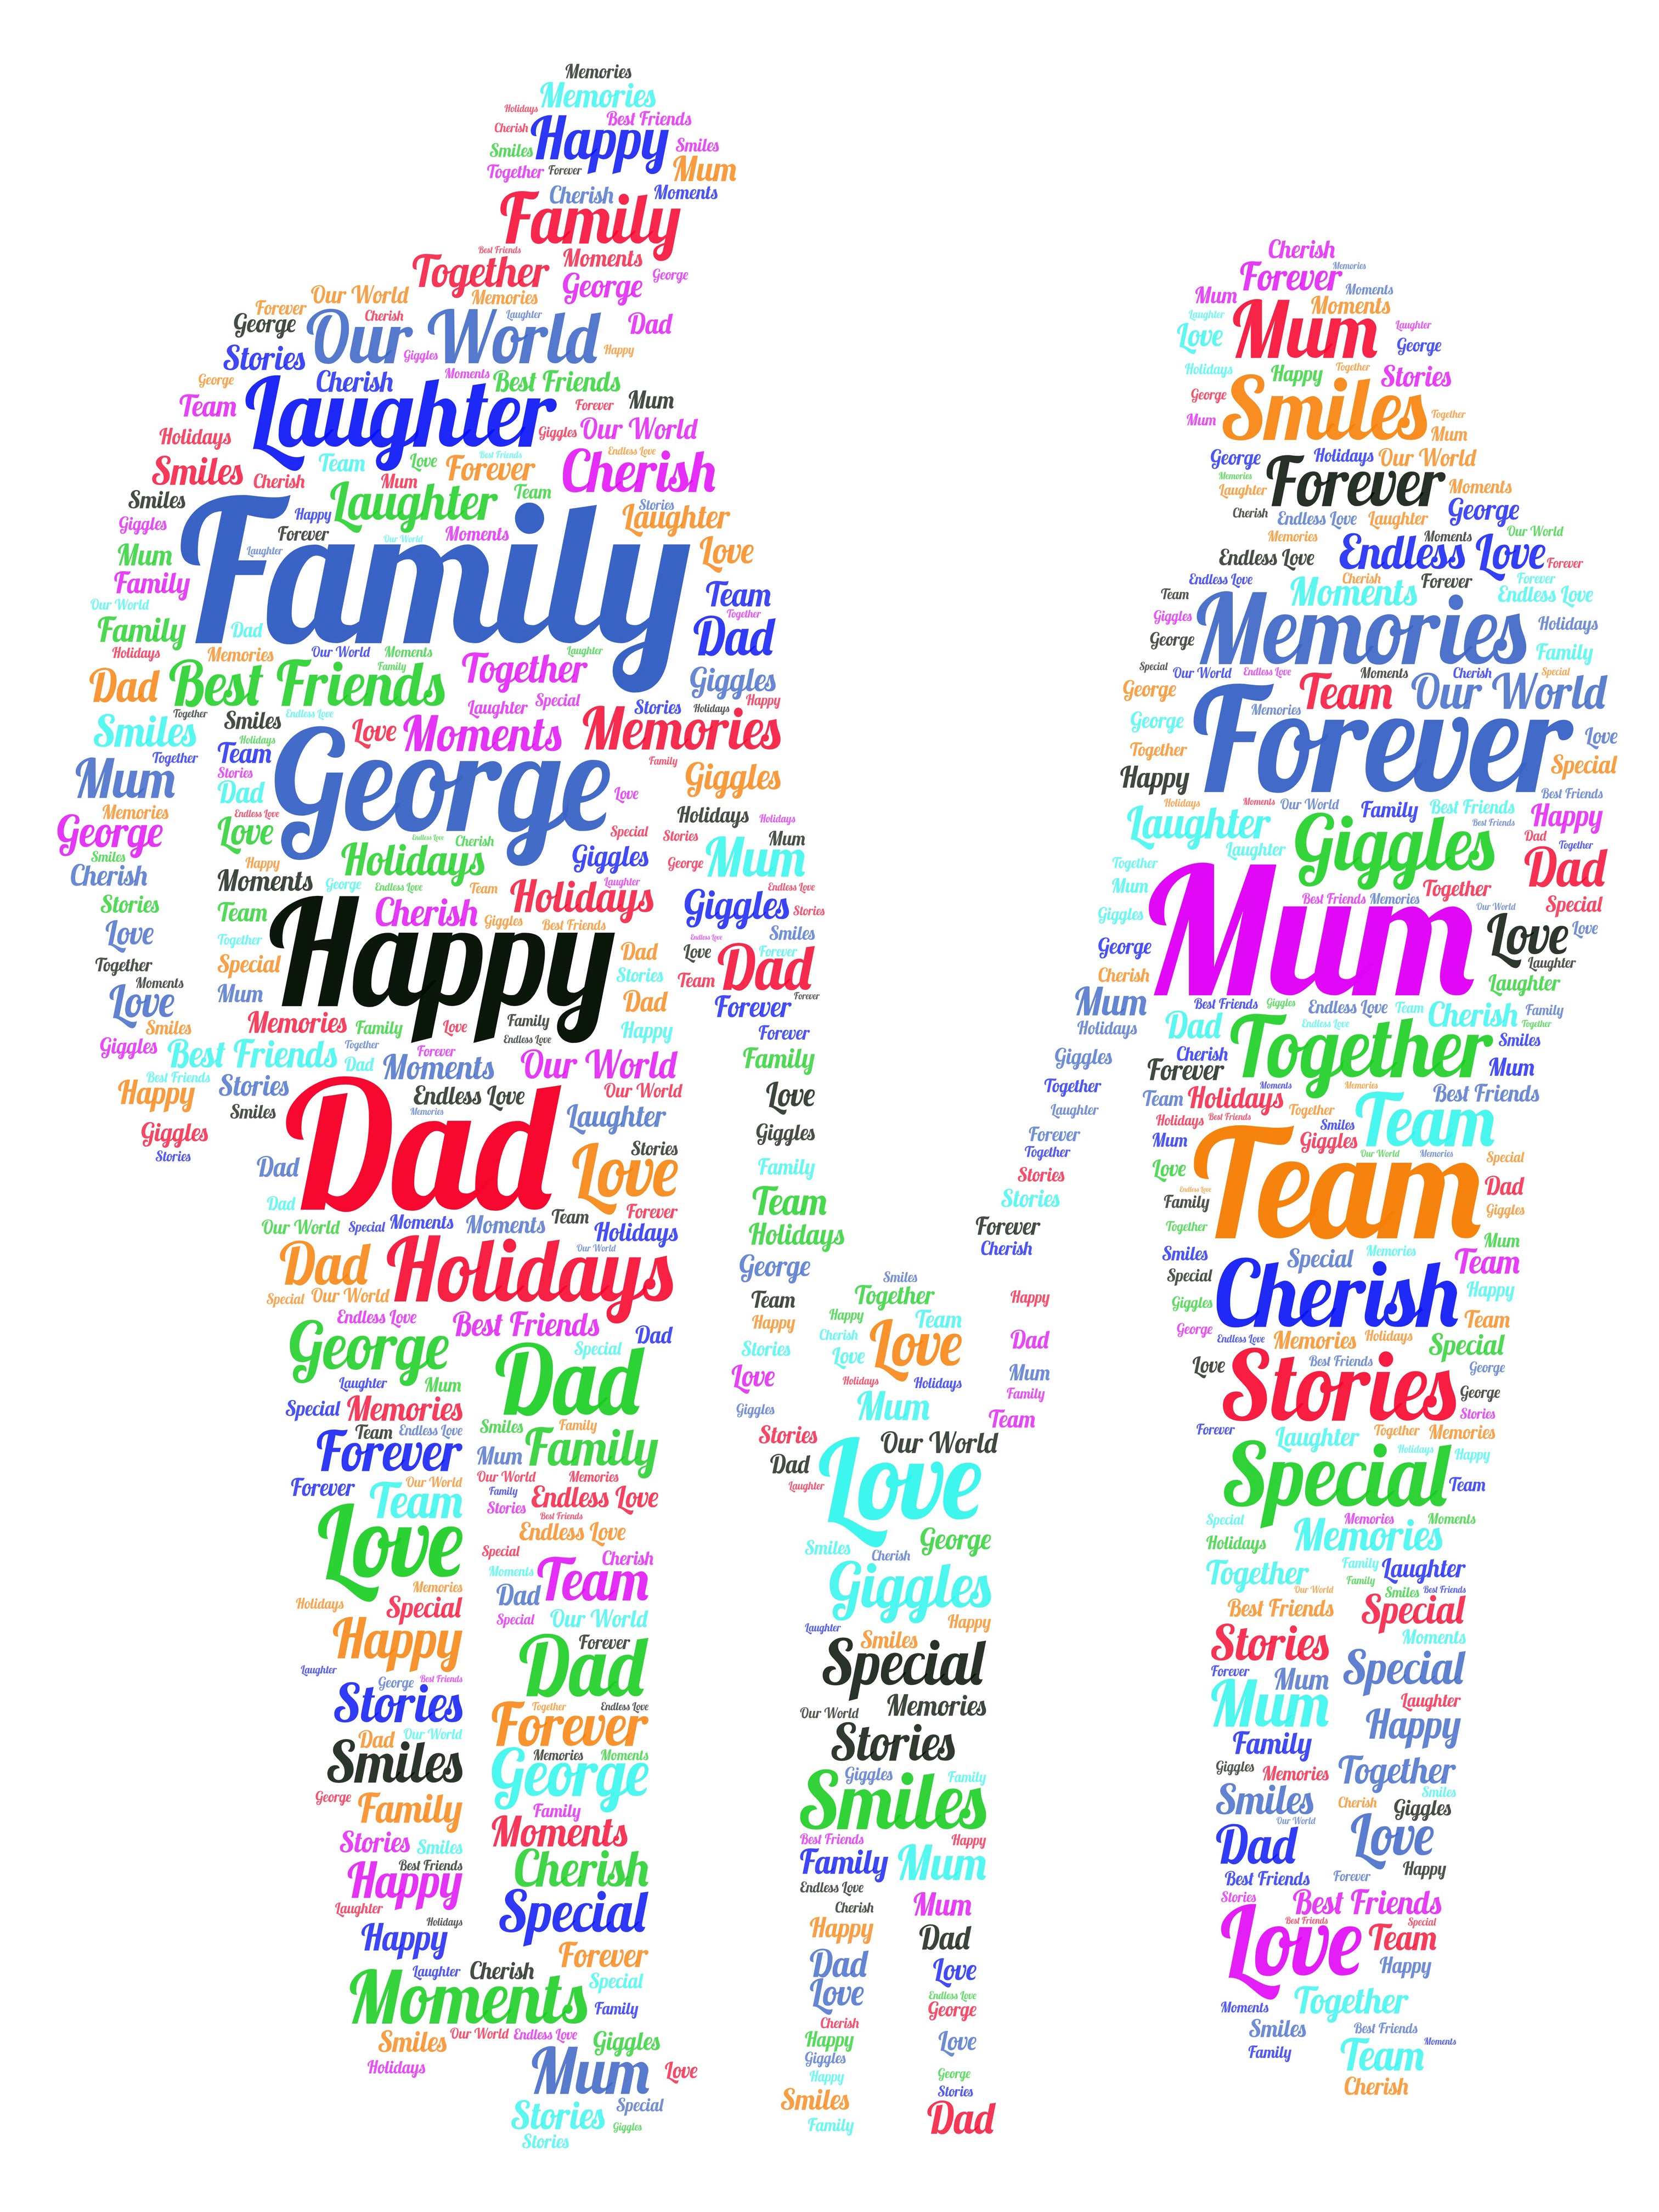 friends and family word art